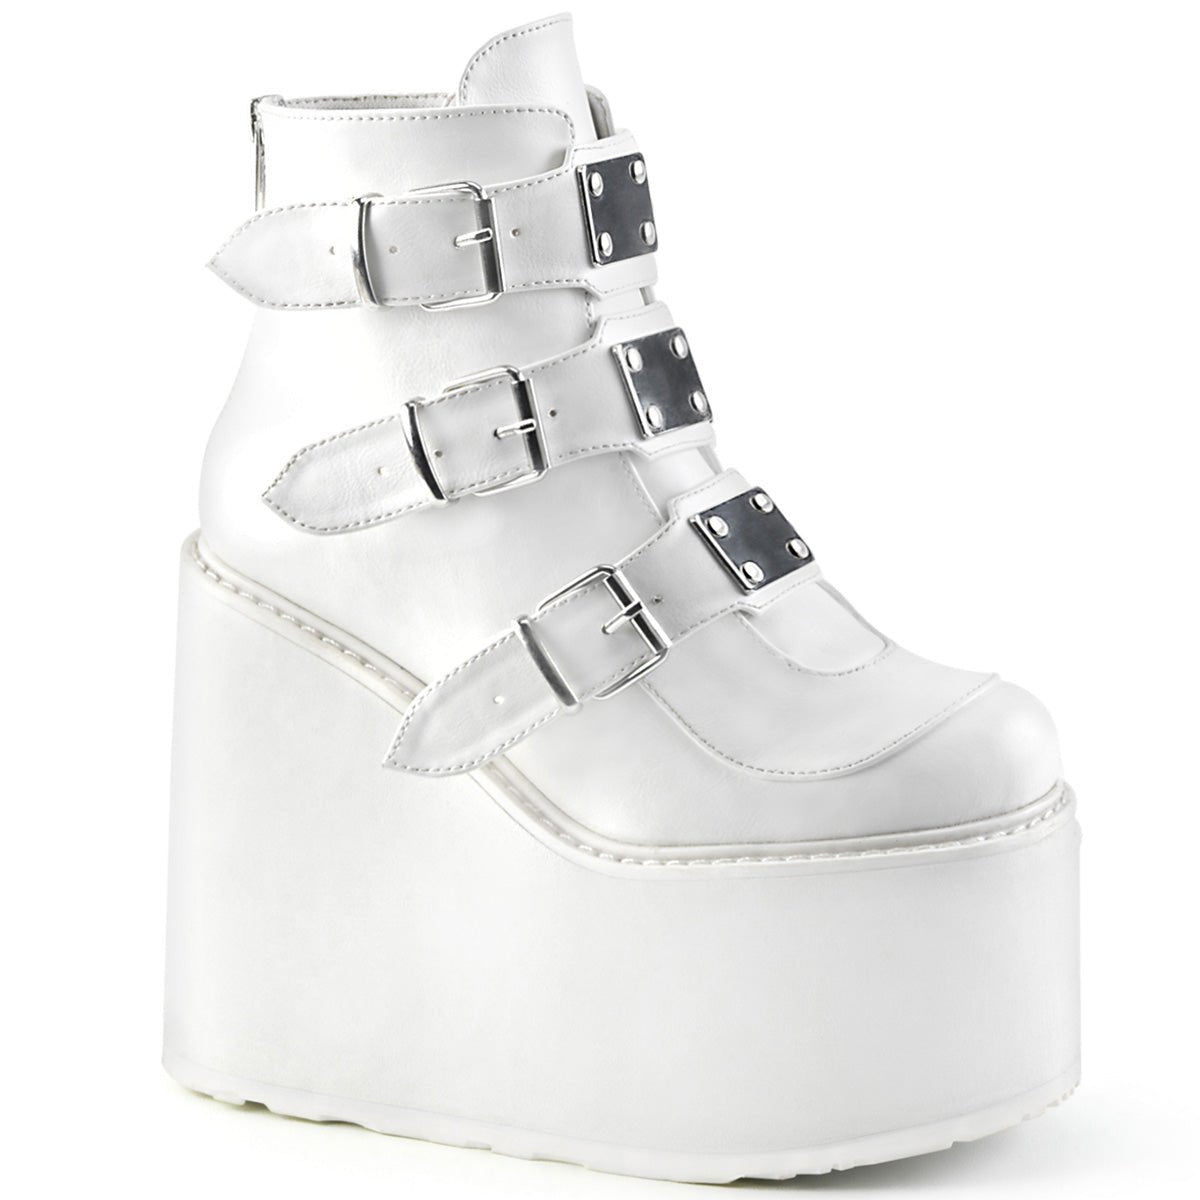 Too Fast | Demonia Swing 105 | White Vegan Leather Women's Ankle Boots